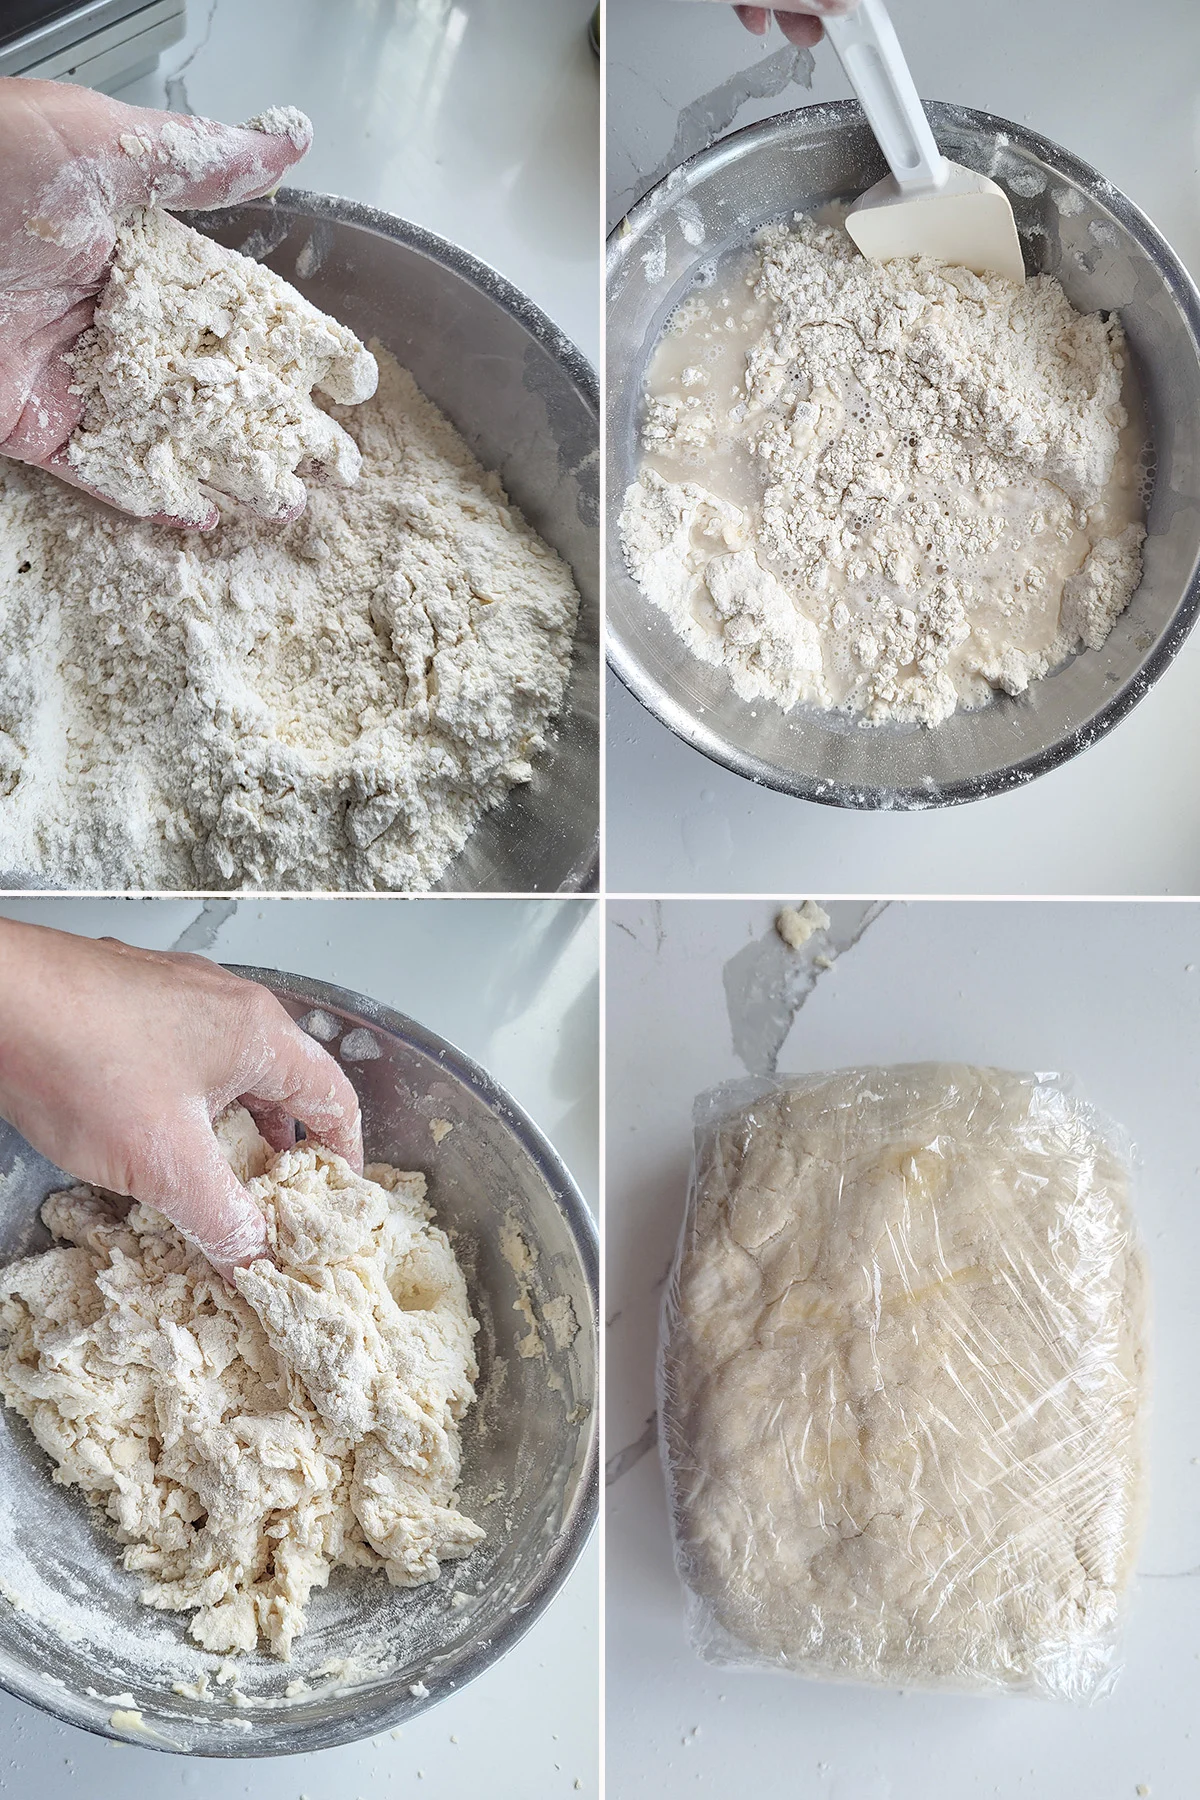 Flour and water in a mixing bowl. A square of dough wrapped in plastic.